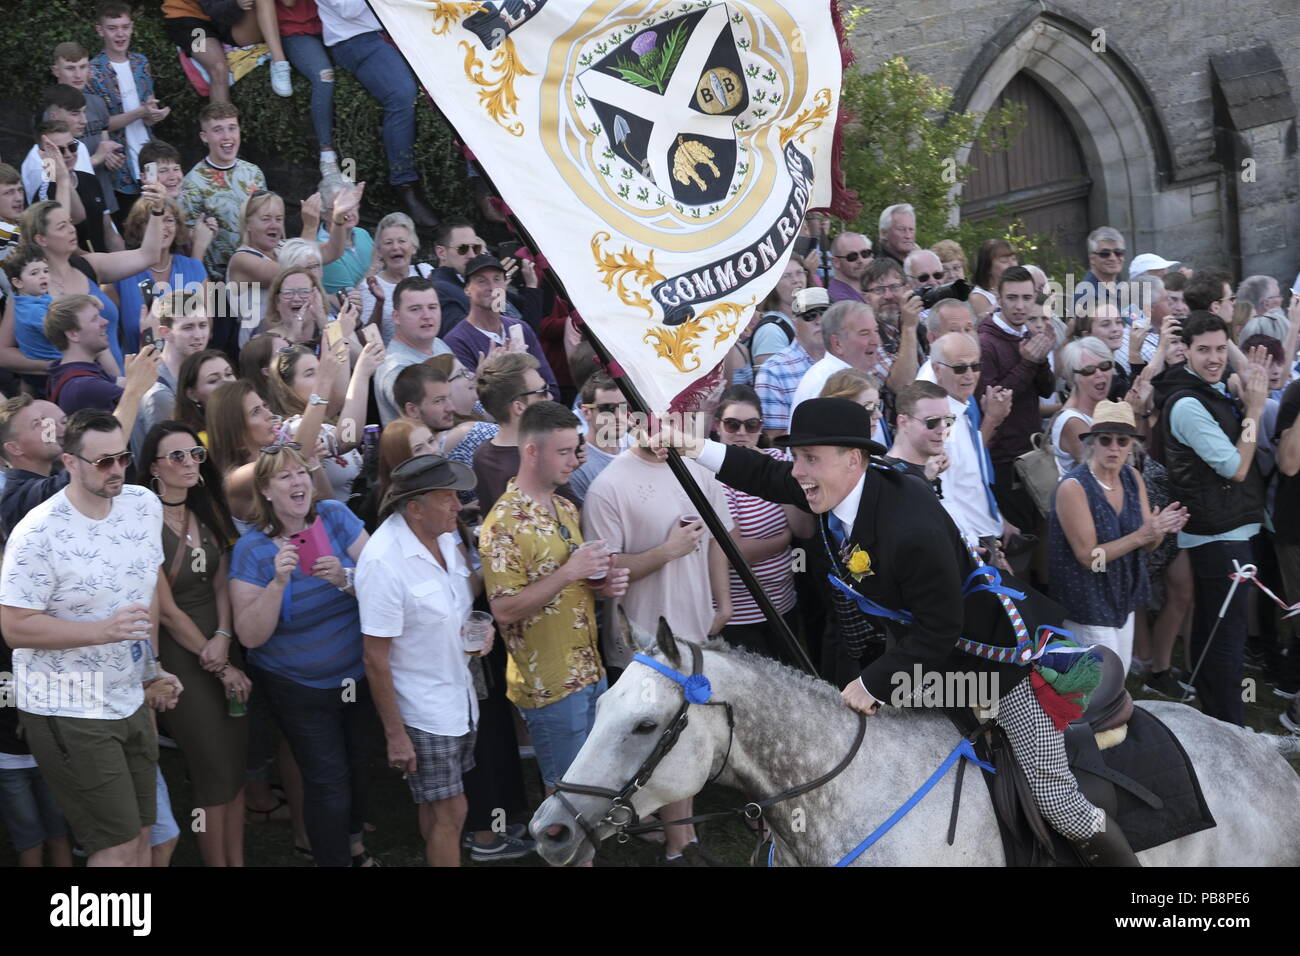 Langholm, Scotland, UK. 27th July, 2018.  Langholm Common Riding - 'Langholm's Great Day' Langholm Cornet Iain Little gallops up the Kirk Wynd ahead of his mounted supporters in Langholm, 'The Muckle Toon' has seen tradition upheld for over 250 years with the Annual Langholm Common Riding which takes place every year on the last Friday in July, This year falling on Friday 27th.   Credit: Rob Gray/Alamy Live News Stock Photo